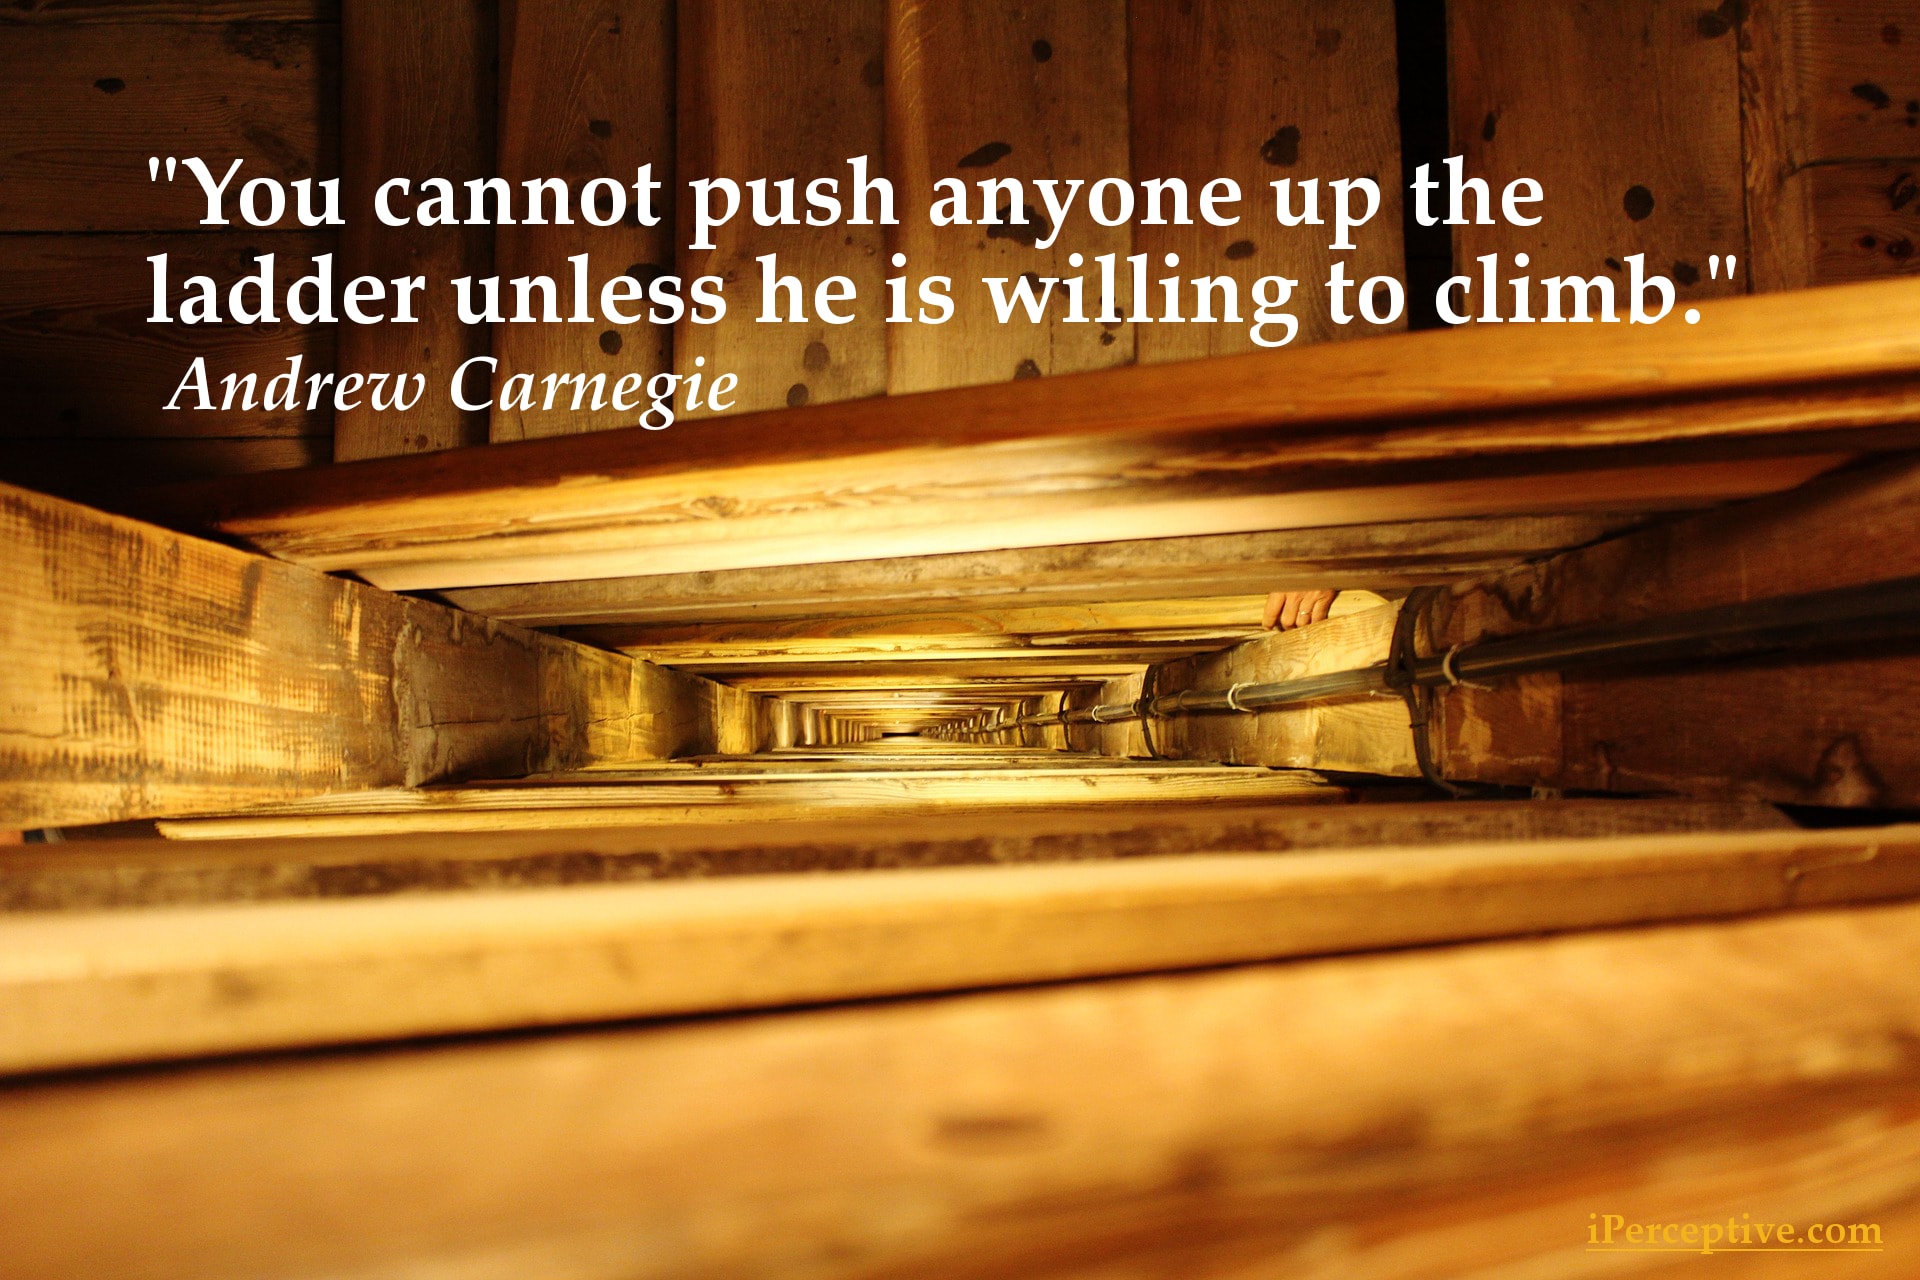 Andrew Carnegie Quote - You cannot push anyone up the ladder...